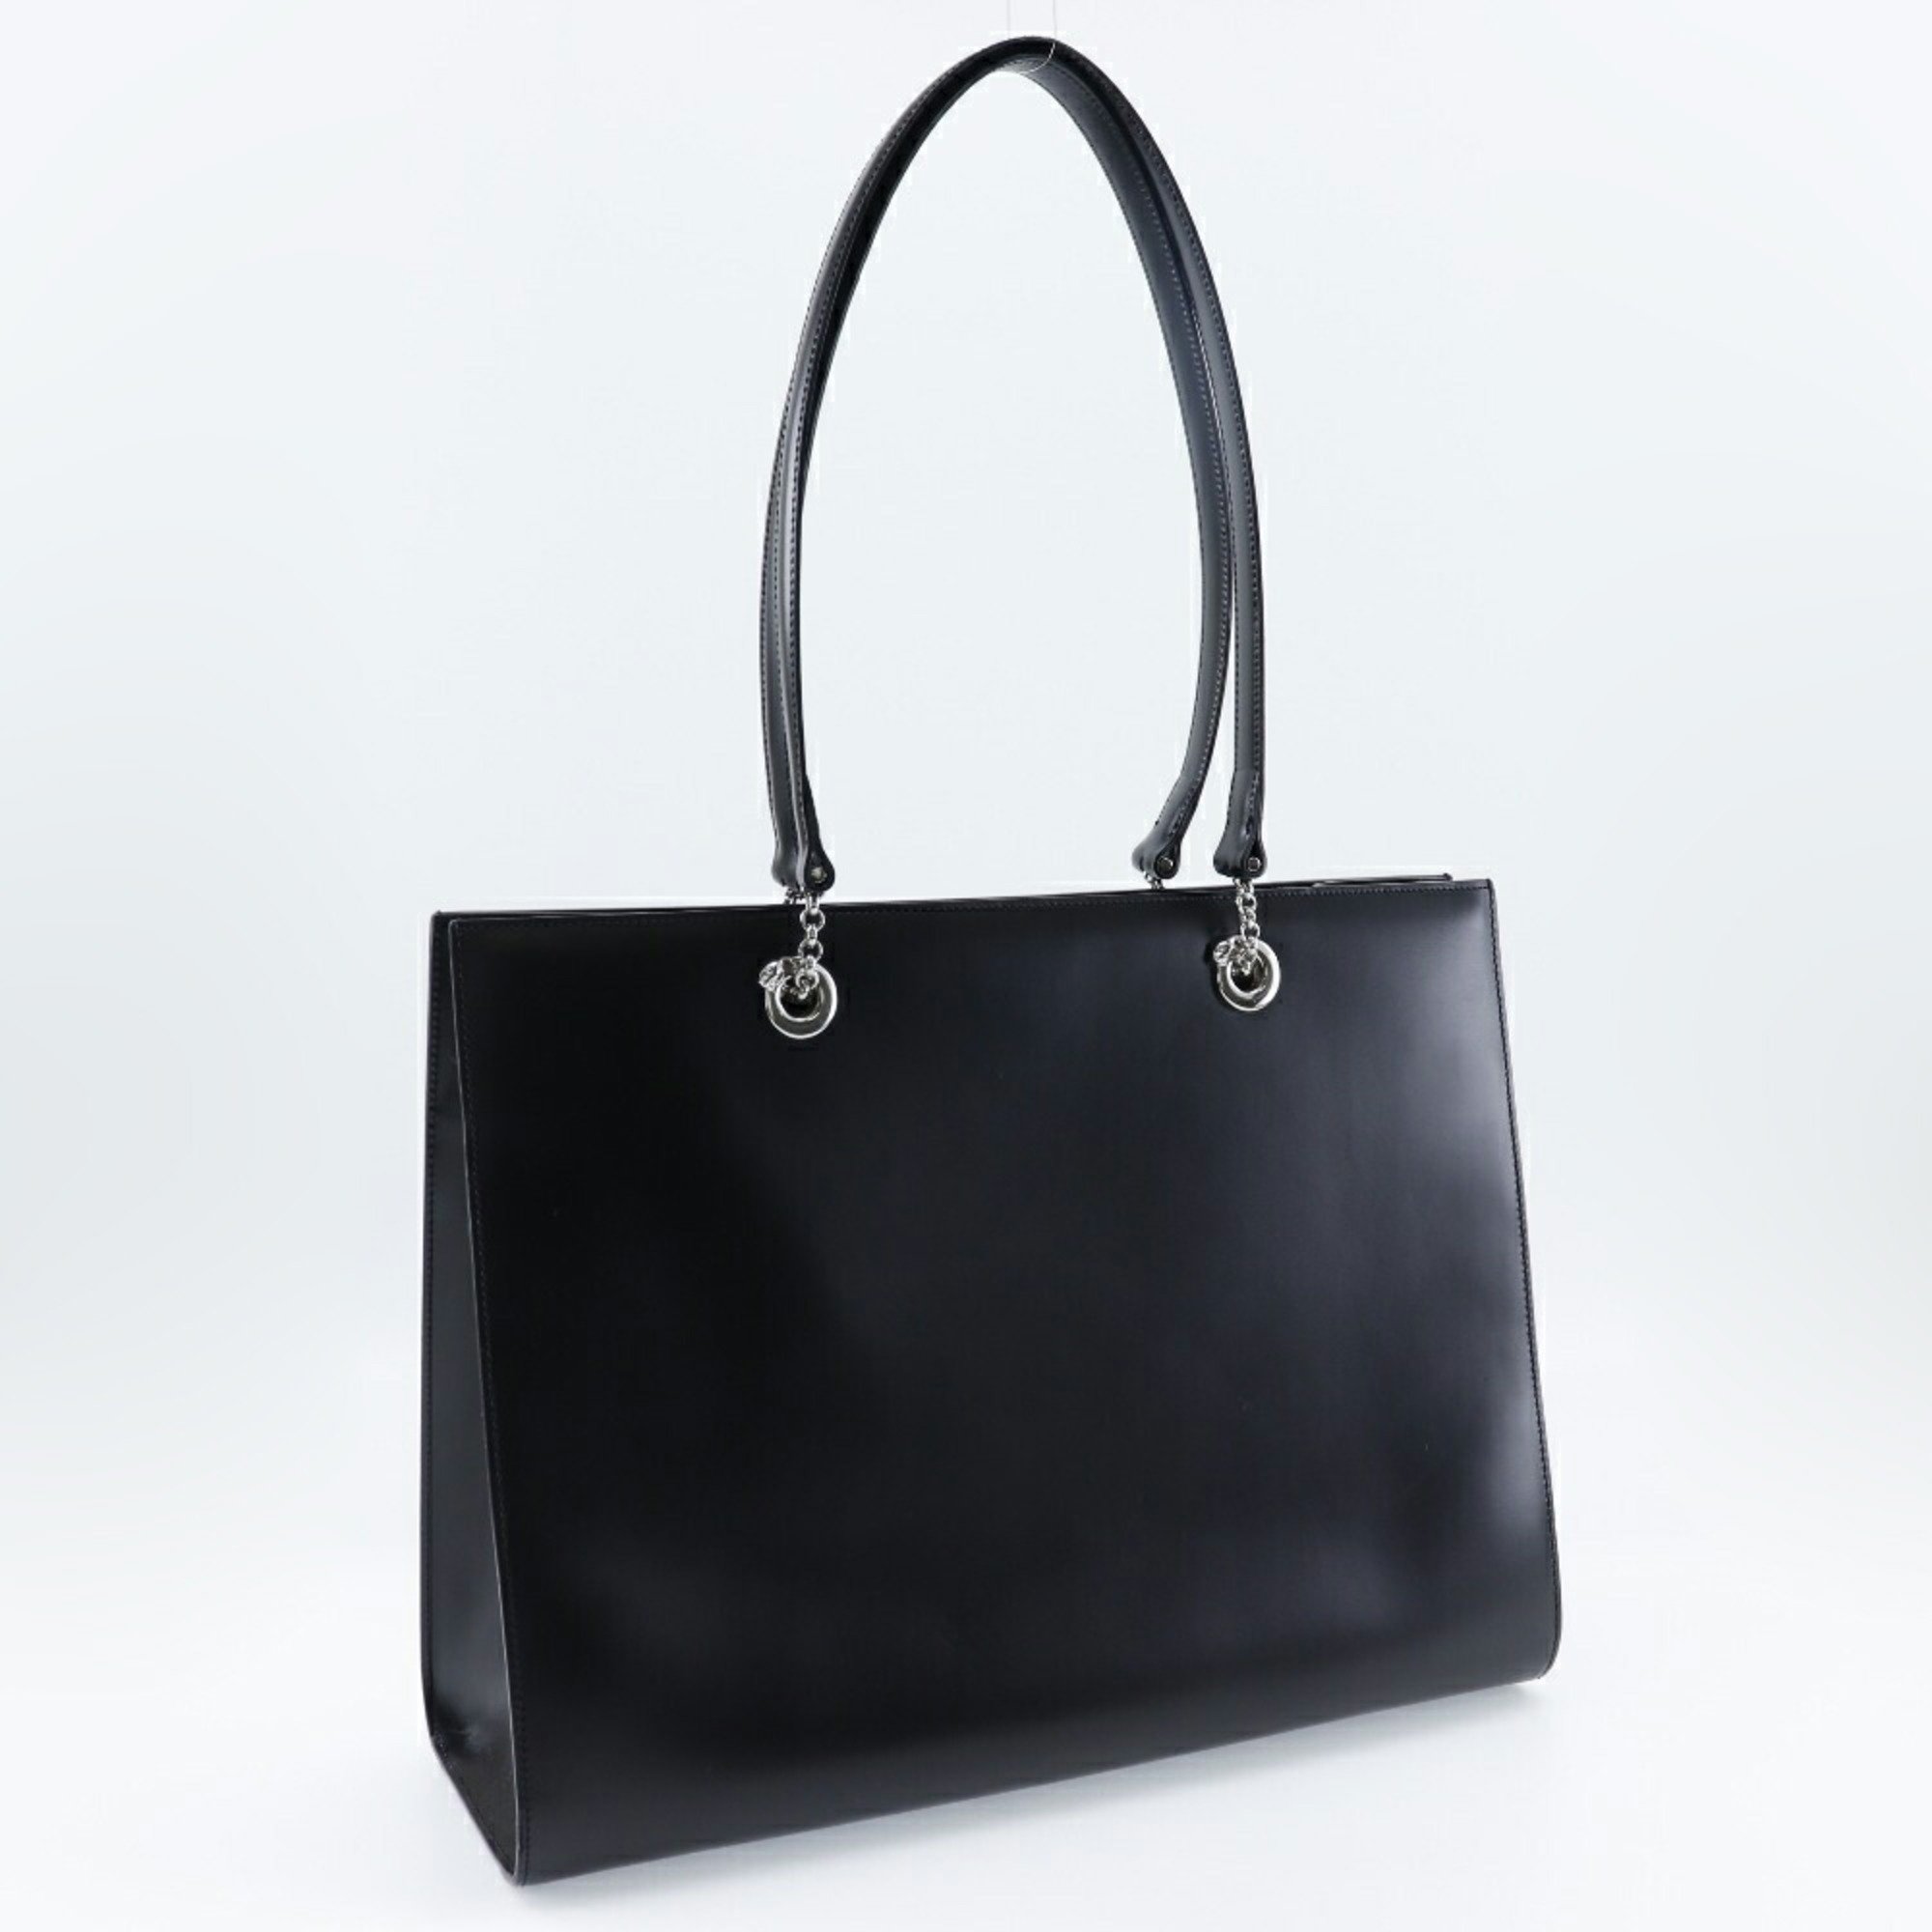 Cartier CARTIER Panthere Tote Bag L1000360 Leather Made in France Black Shoulder Handbag A4 Snap Button PANTHERE Ladies